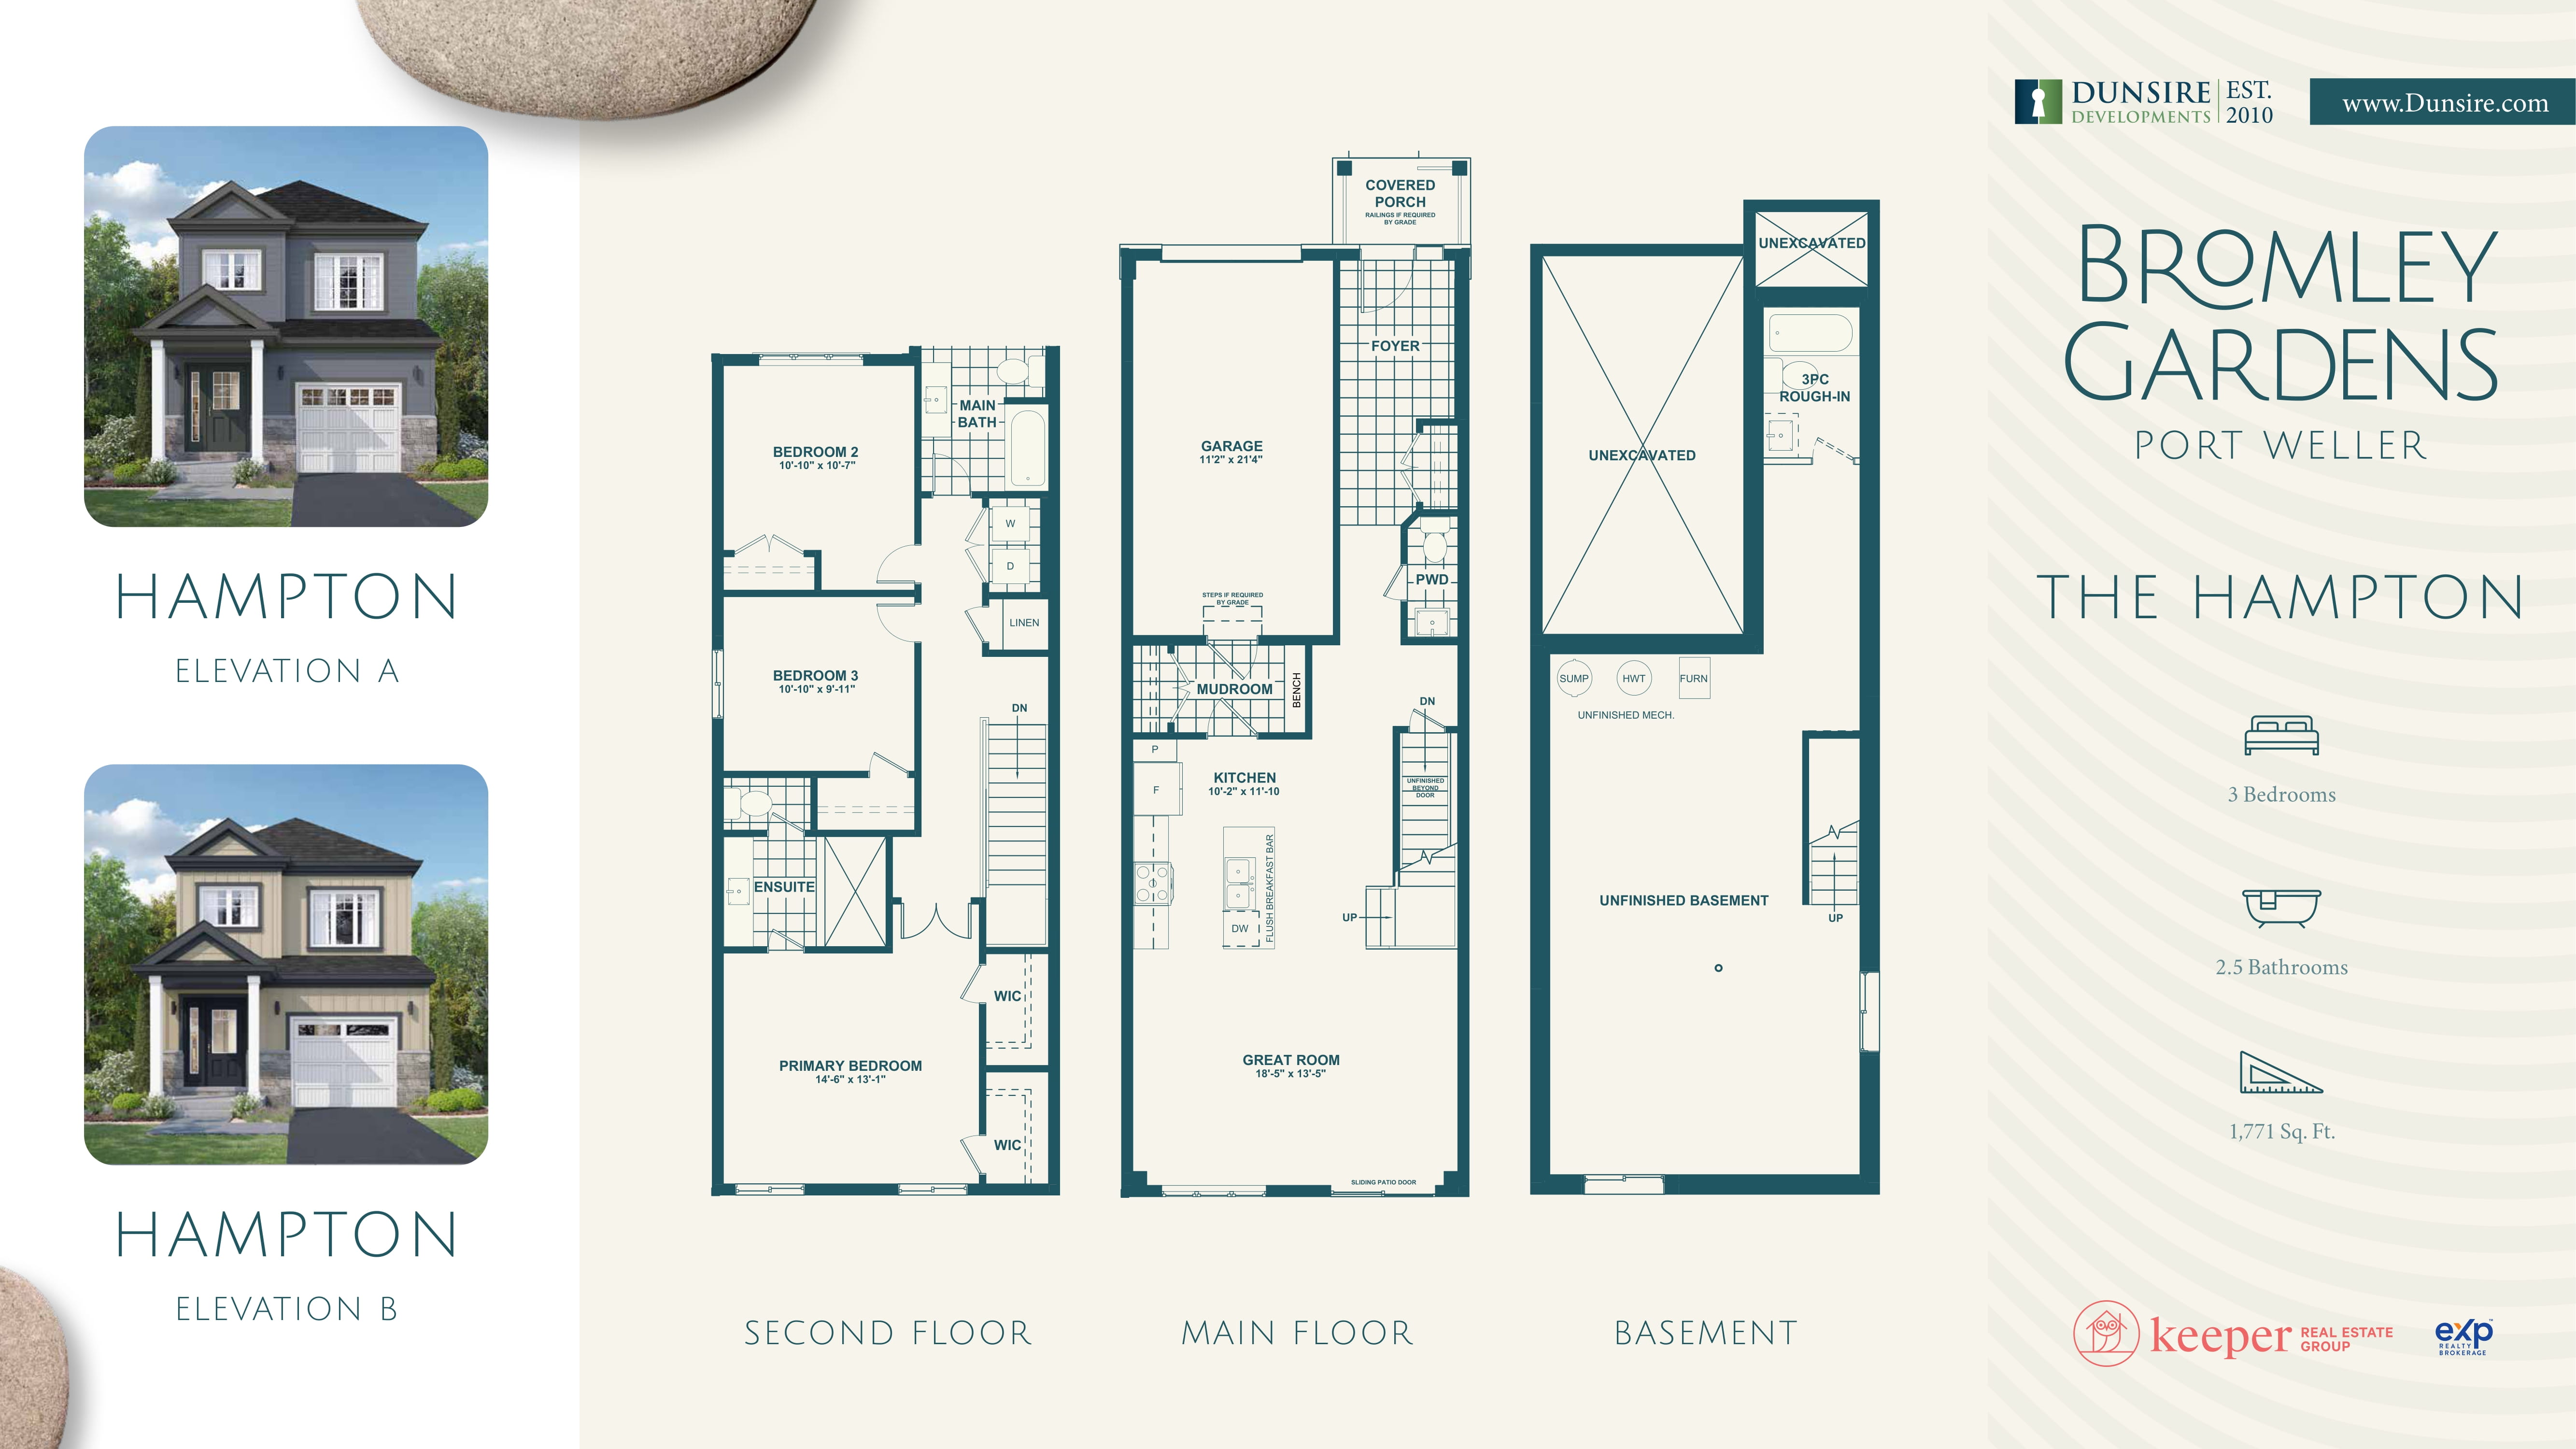  Floor Plan of Bromley Gardens with undefined beds